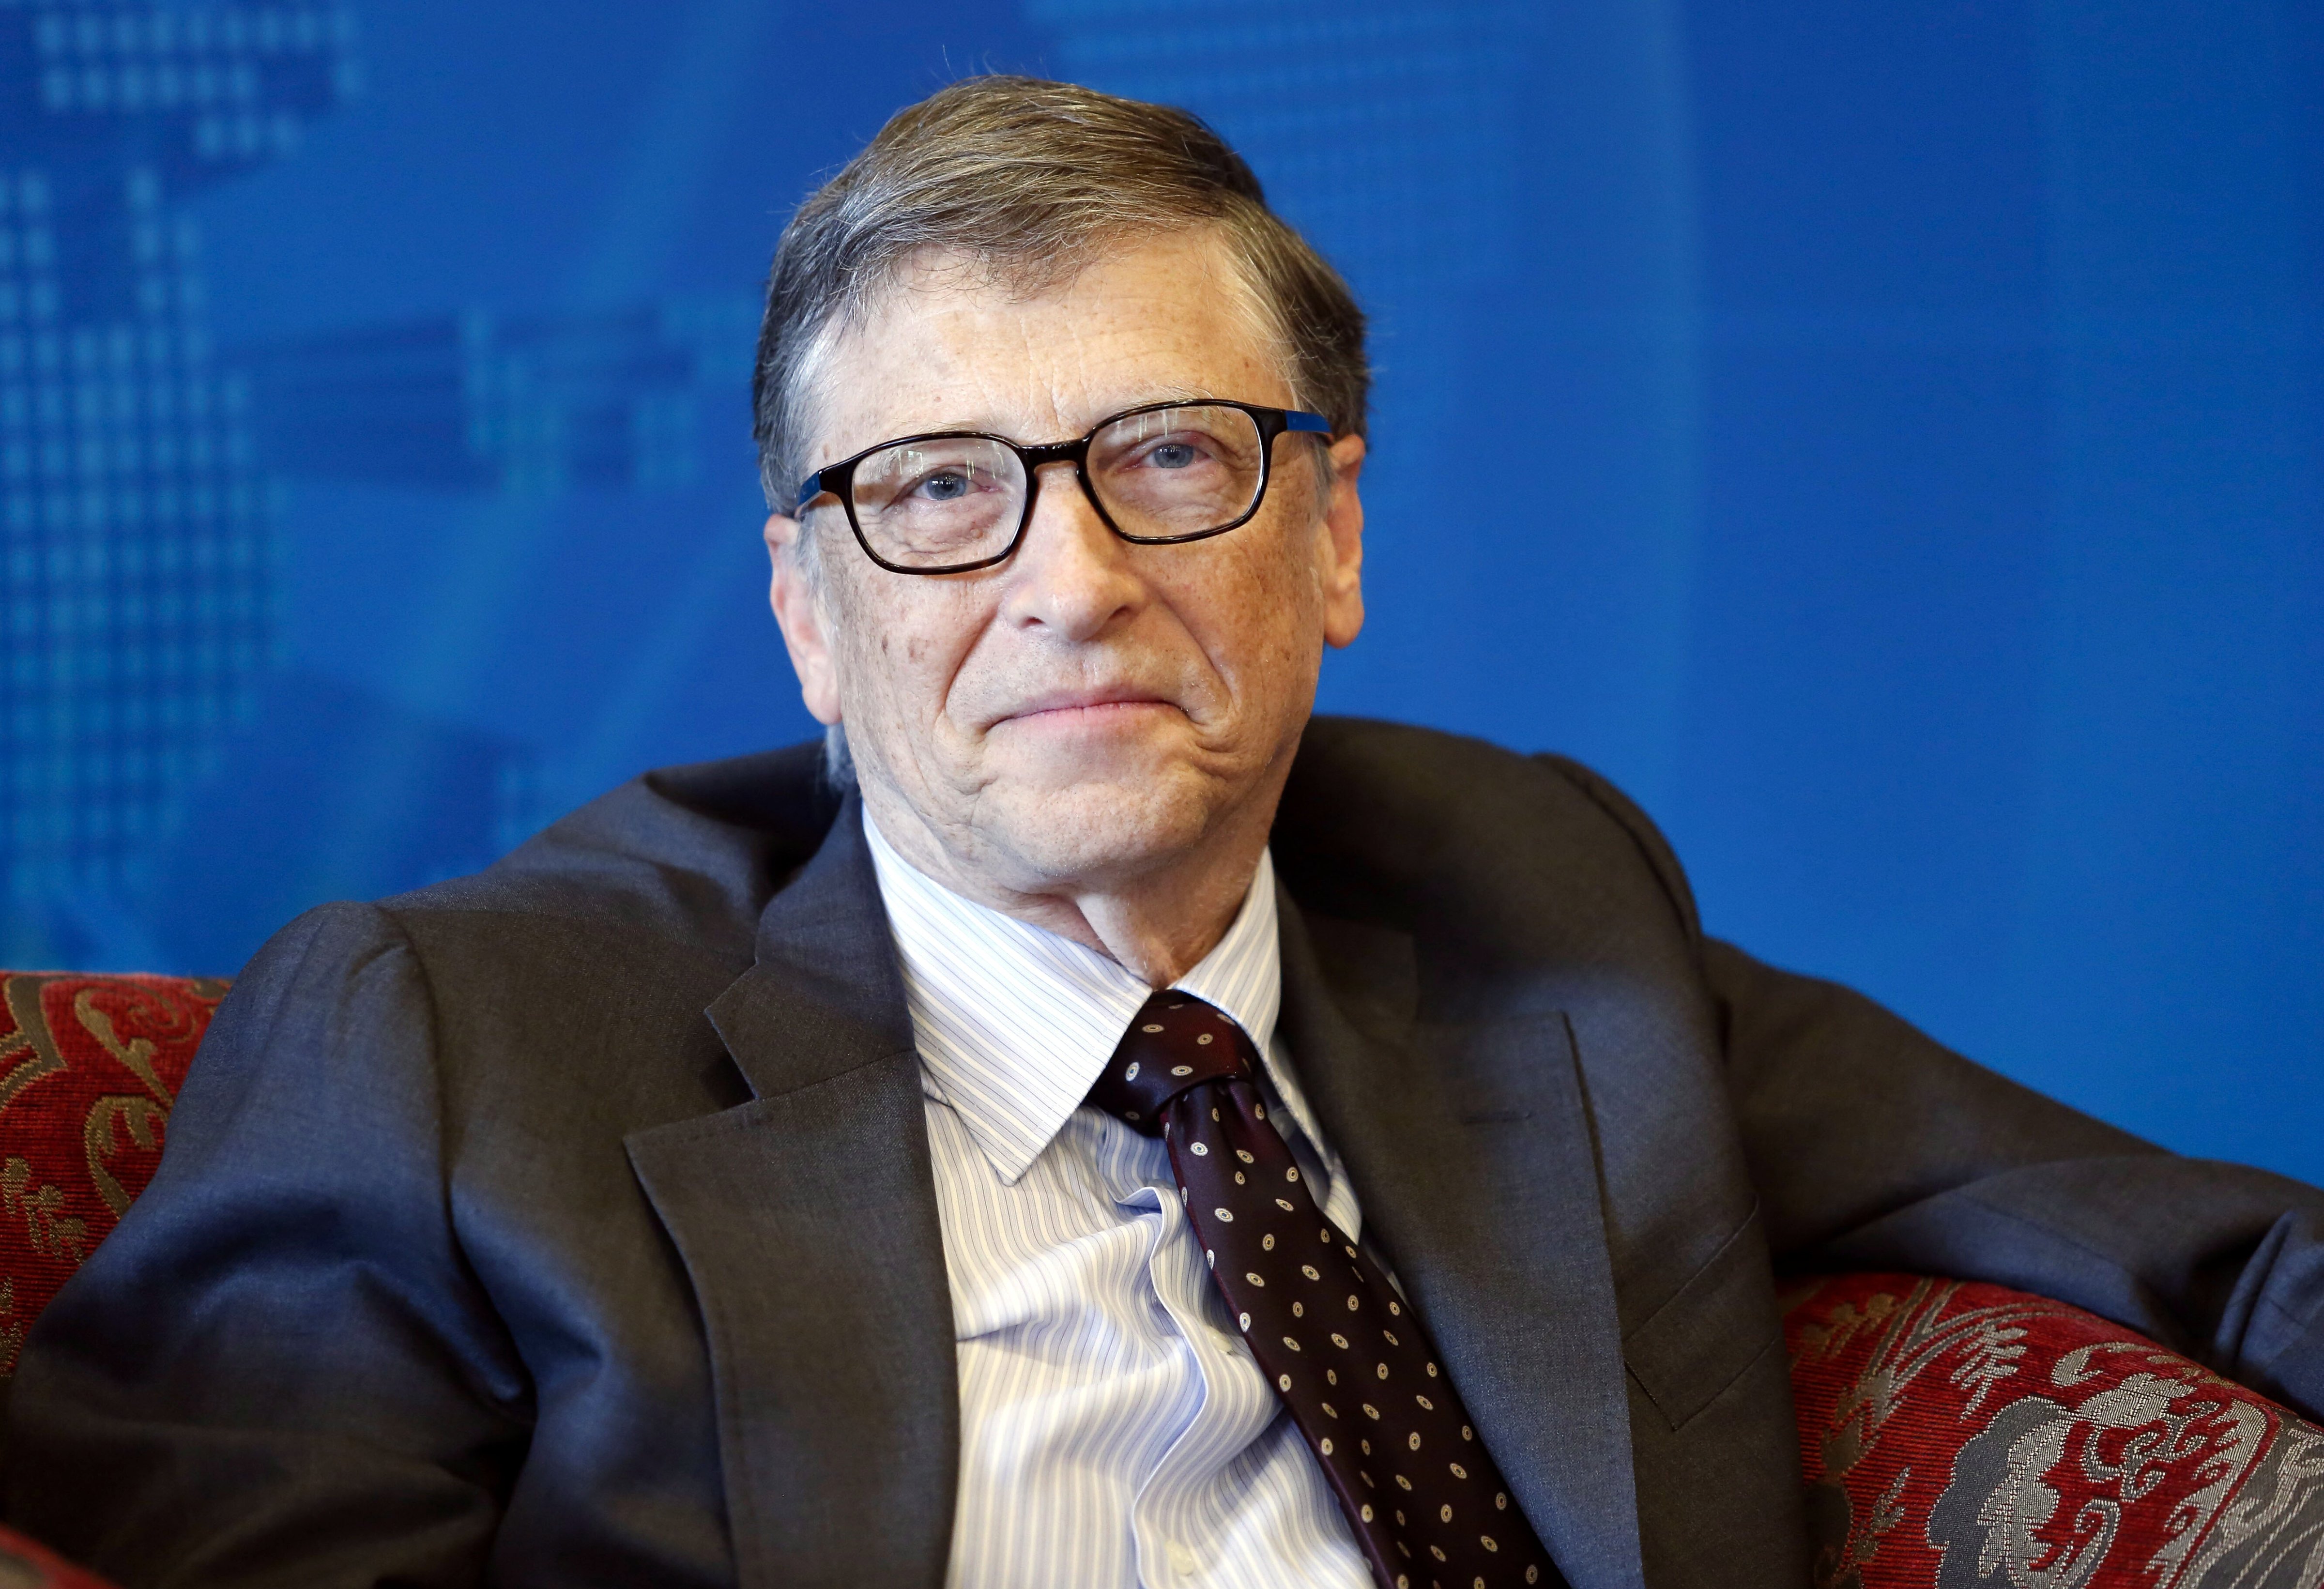 Bill Gates, co-founder of Microsoft attends a breakfast meeting with the theme "Dialogue: Technology &amp; Innovation for a Sustainable Future" during the Boao Forum For Asia Annual Conference 2015 in Qionghai city, Hainan Province, China on March 29, 2015.